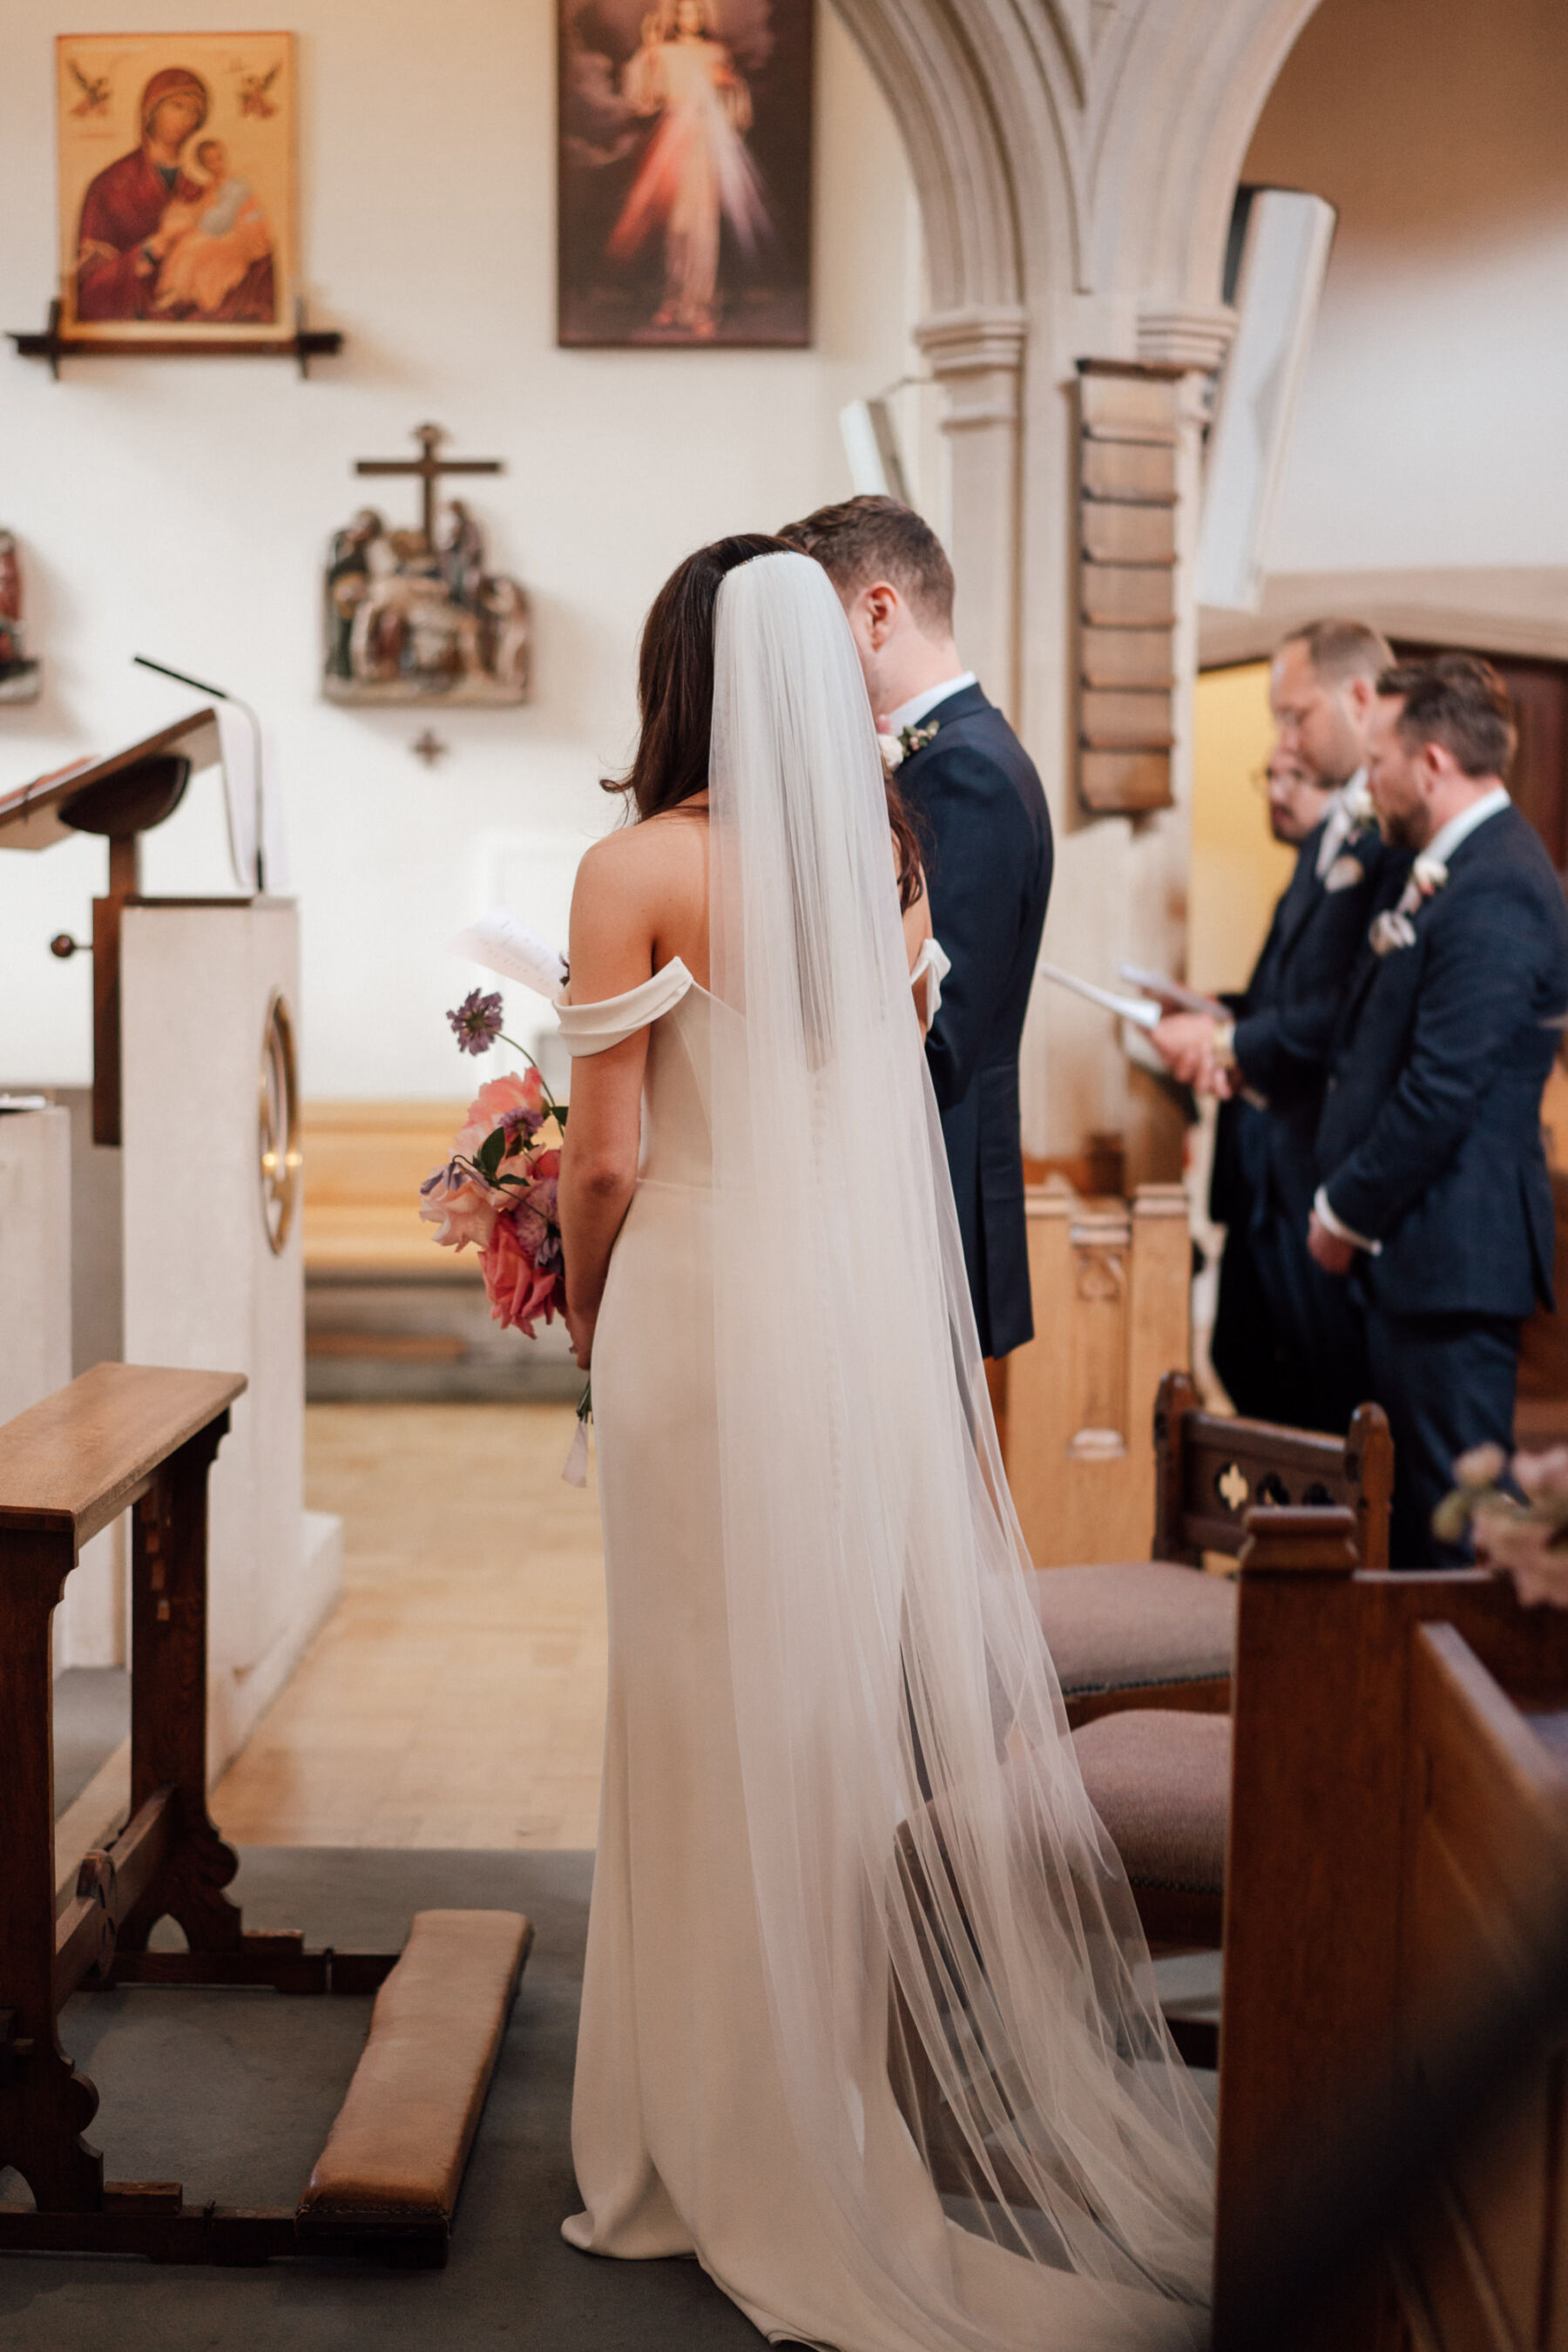 Elegant church wedding, bride wears Roxy by Suzanne Neville. The Shannons Photography.